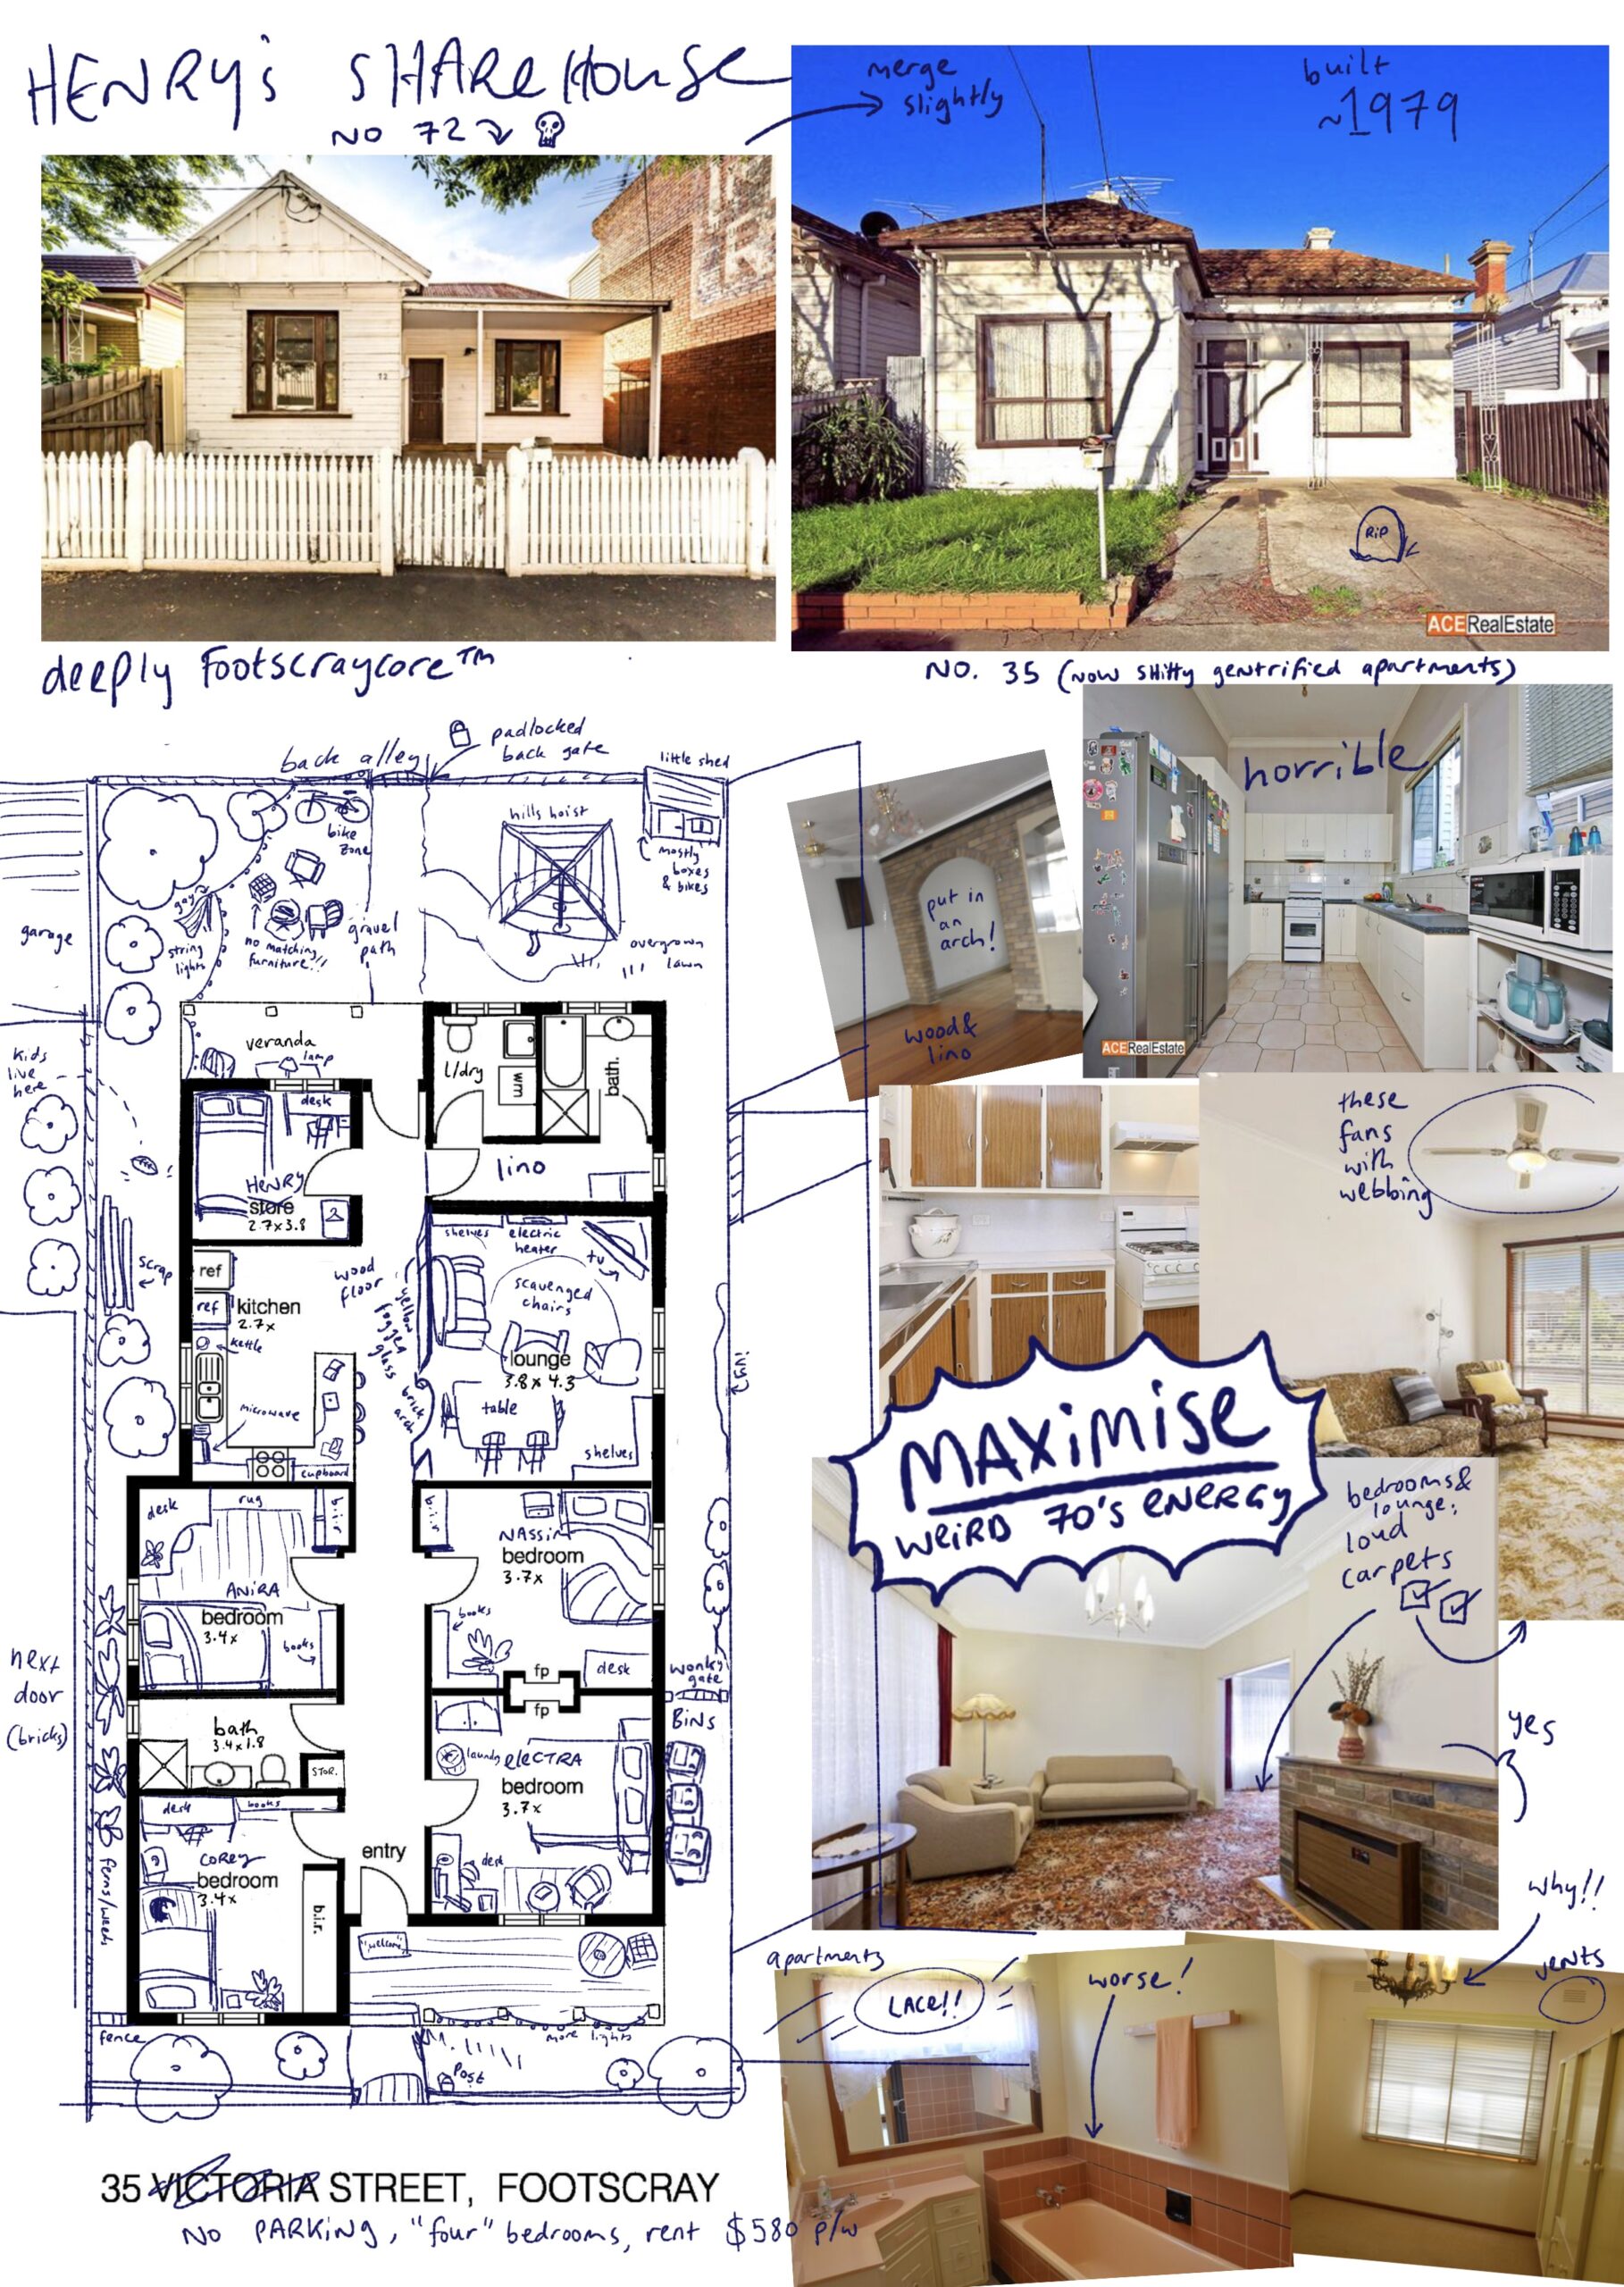 a floor plan for a messy sharehouse, based off several real estate photos of actual houses for sale. Some of the houses have been knocked down and turned into shitty gentrified apartments! Boo!